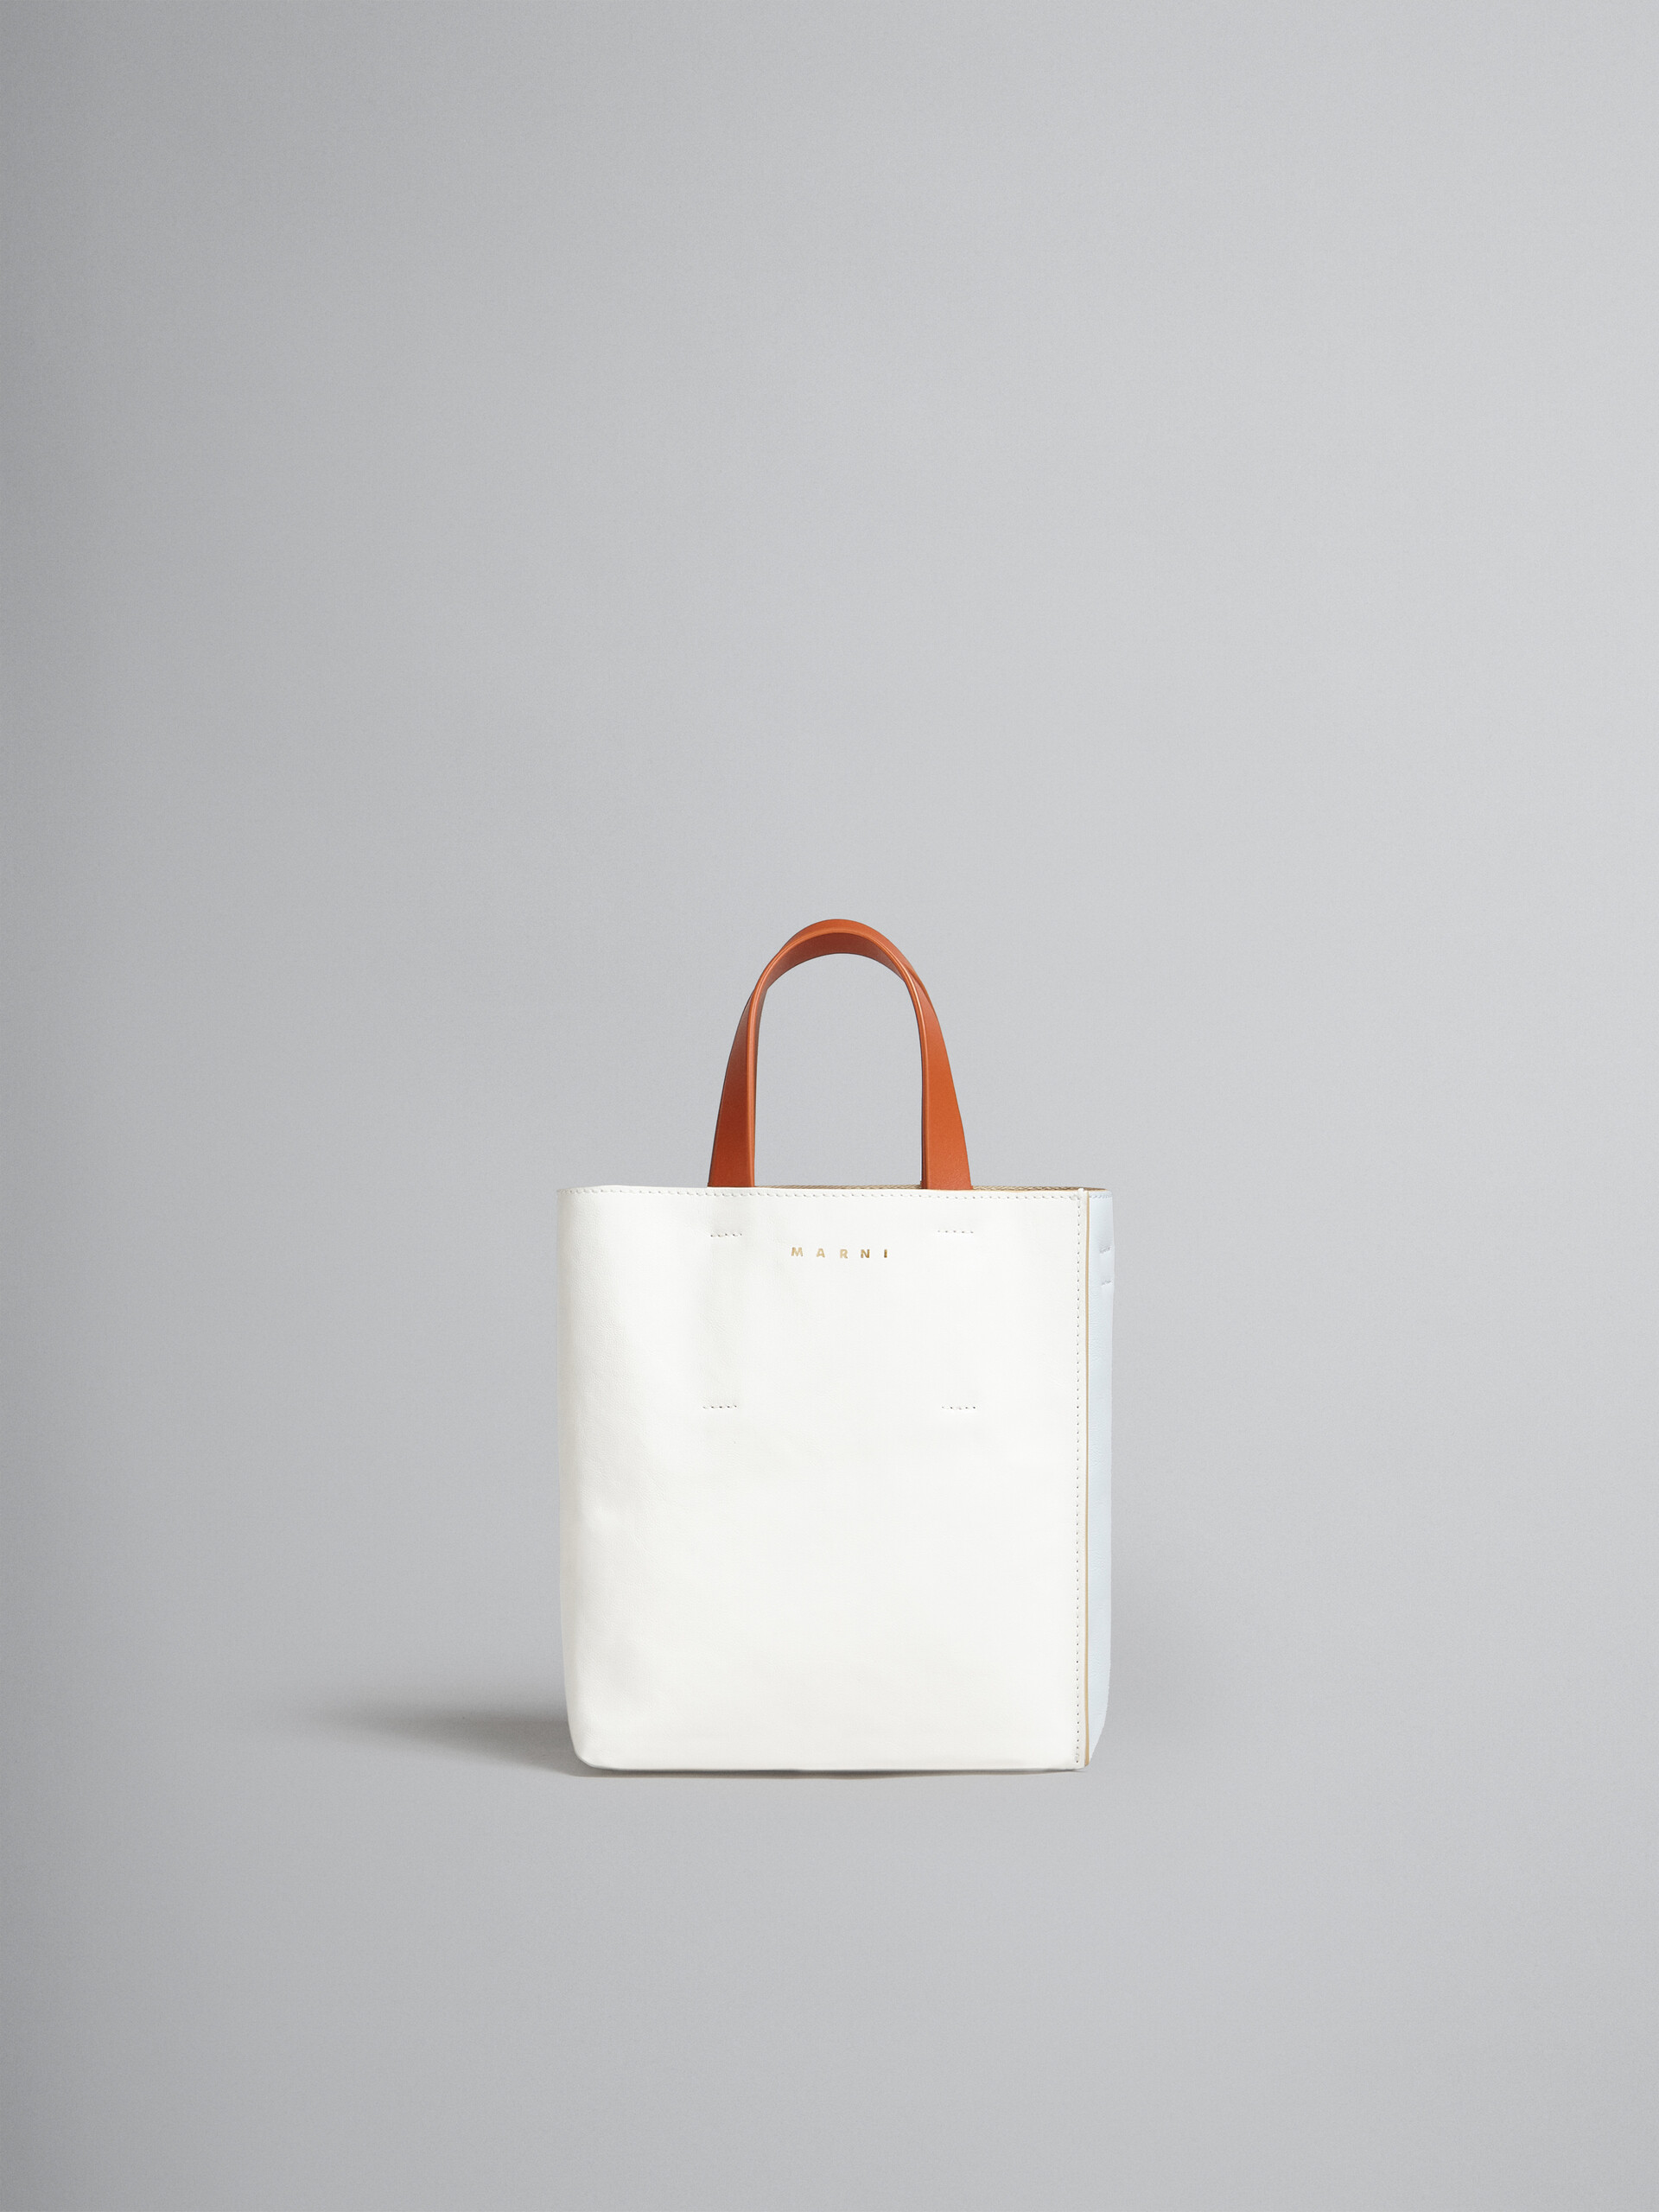 Museo Soft Mini Bag in white light blue and orange leather - Shopping Bags - Image 1